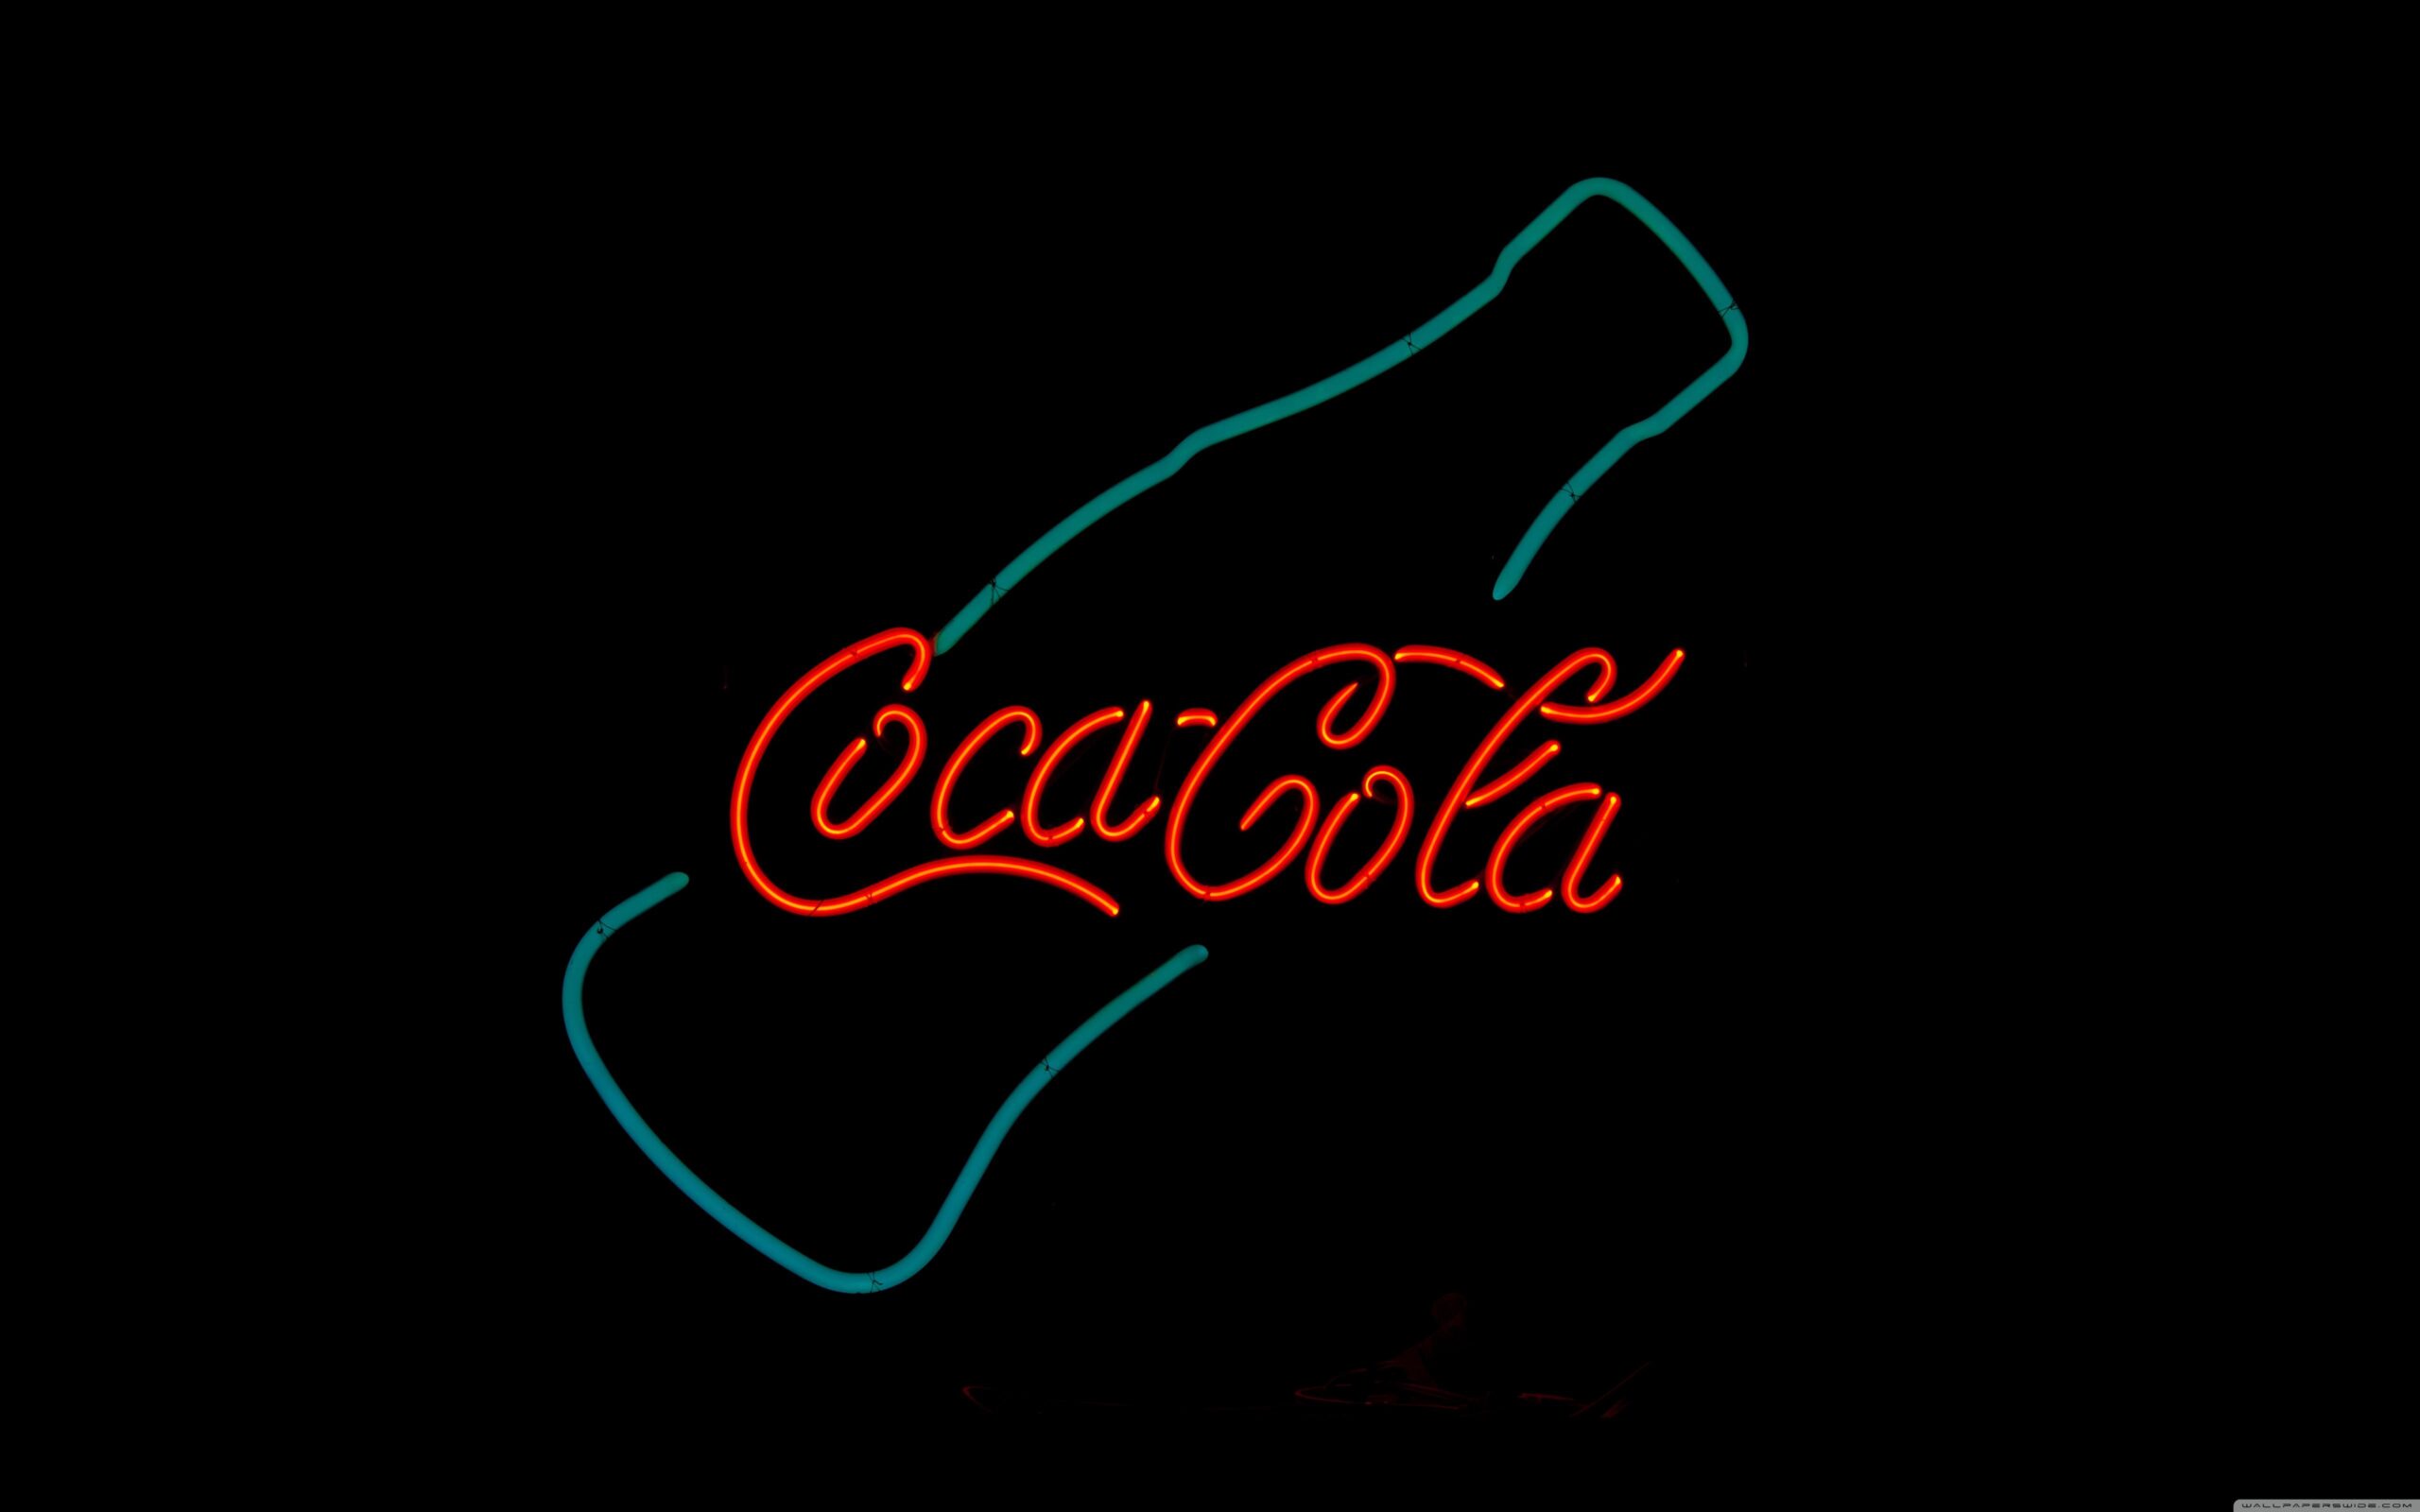 Texas, Coca, Cola wallpapers Wallpapers 2K | Desk 4K and